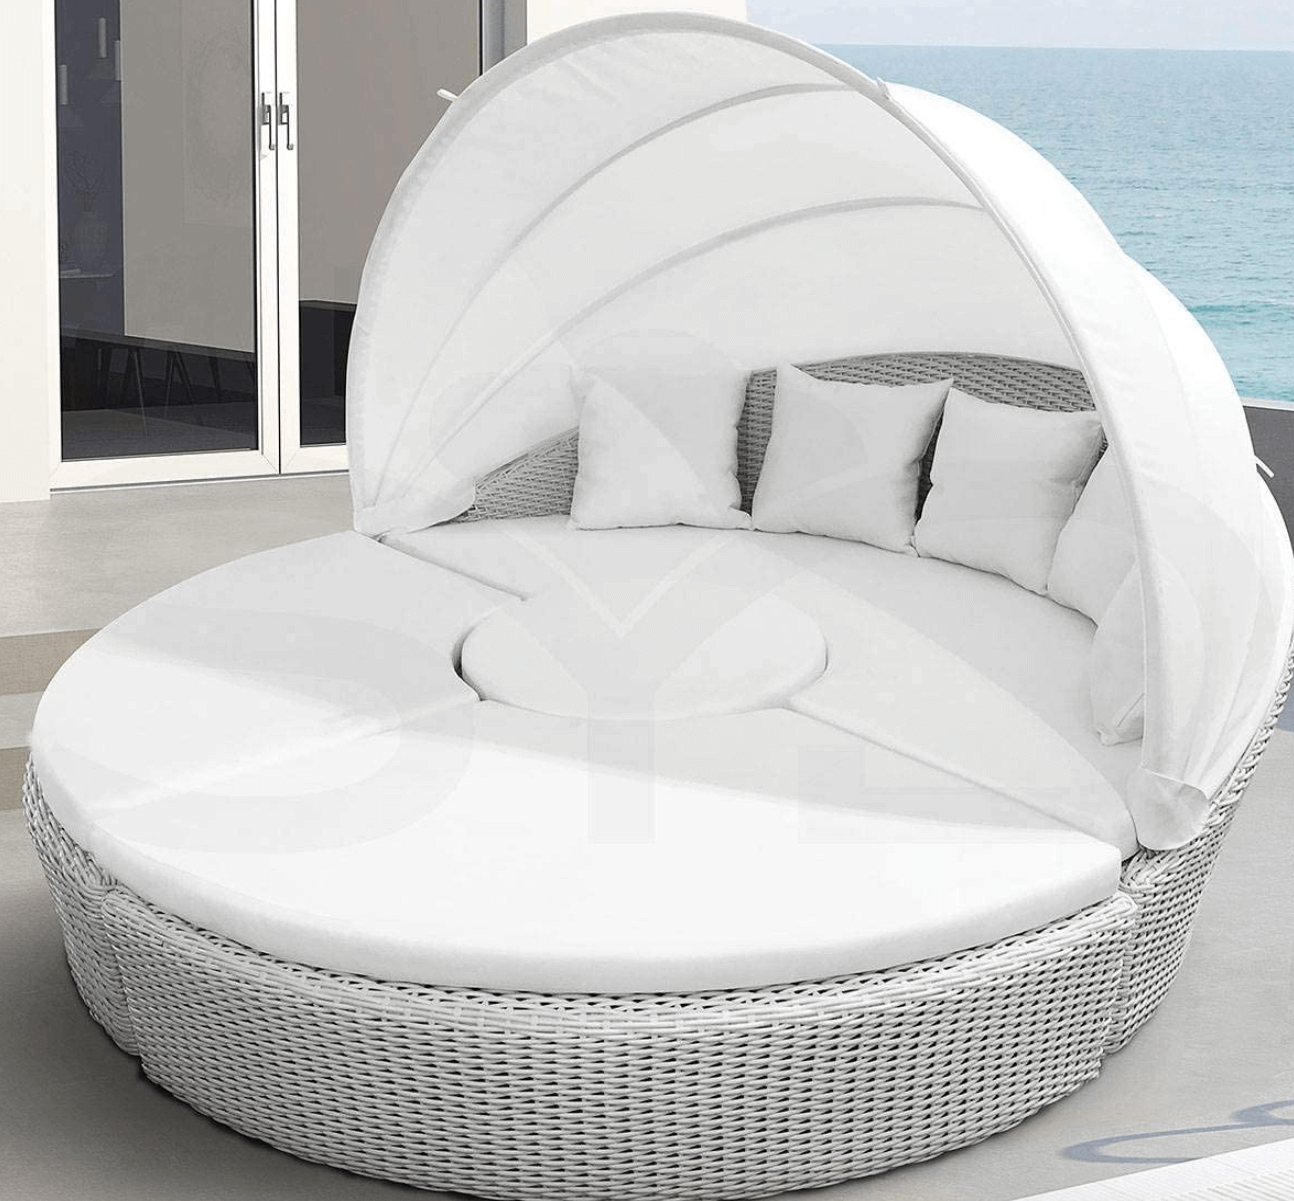 Round bed made of vegetable fibers for the garden